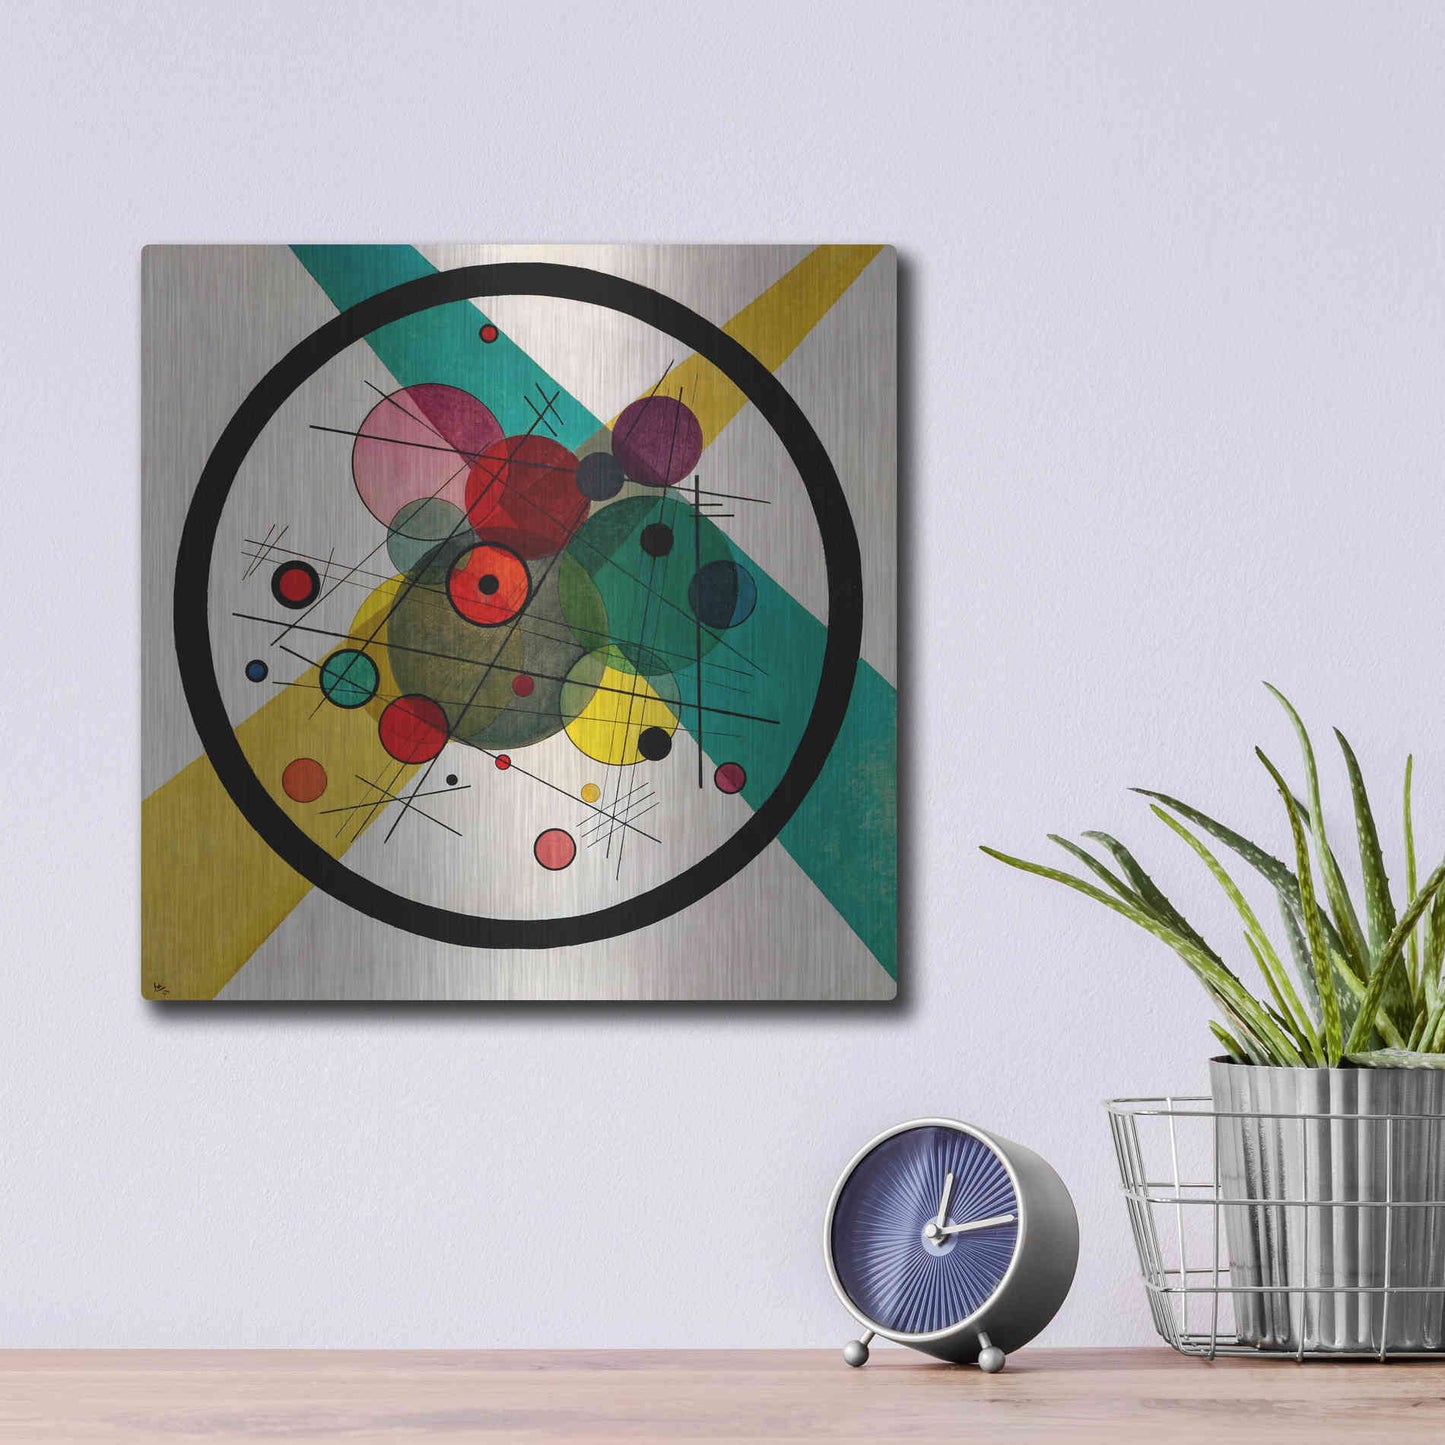 Luxe Metal Art 'Circles In A Circle' by Wassily Kandinsky, Metal Wall Art",12x12